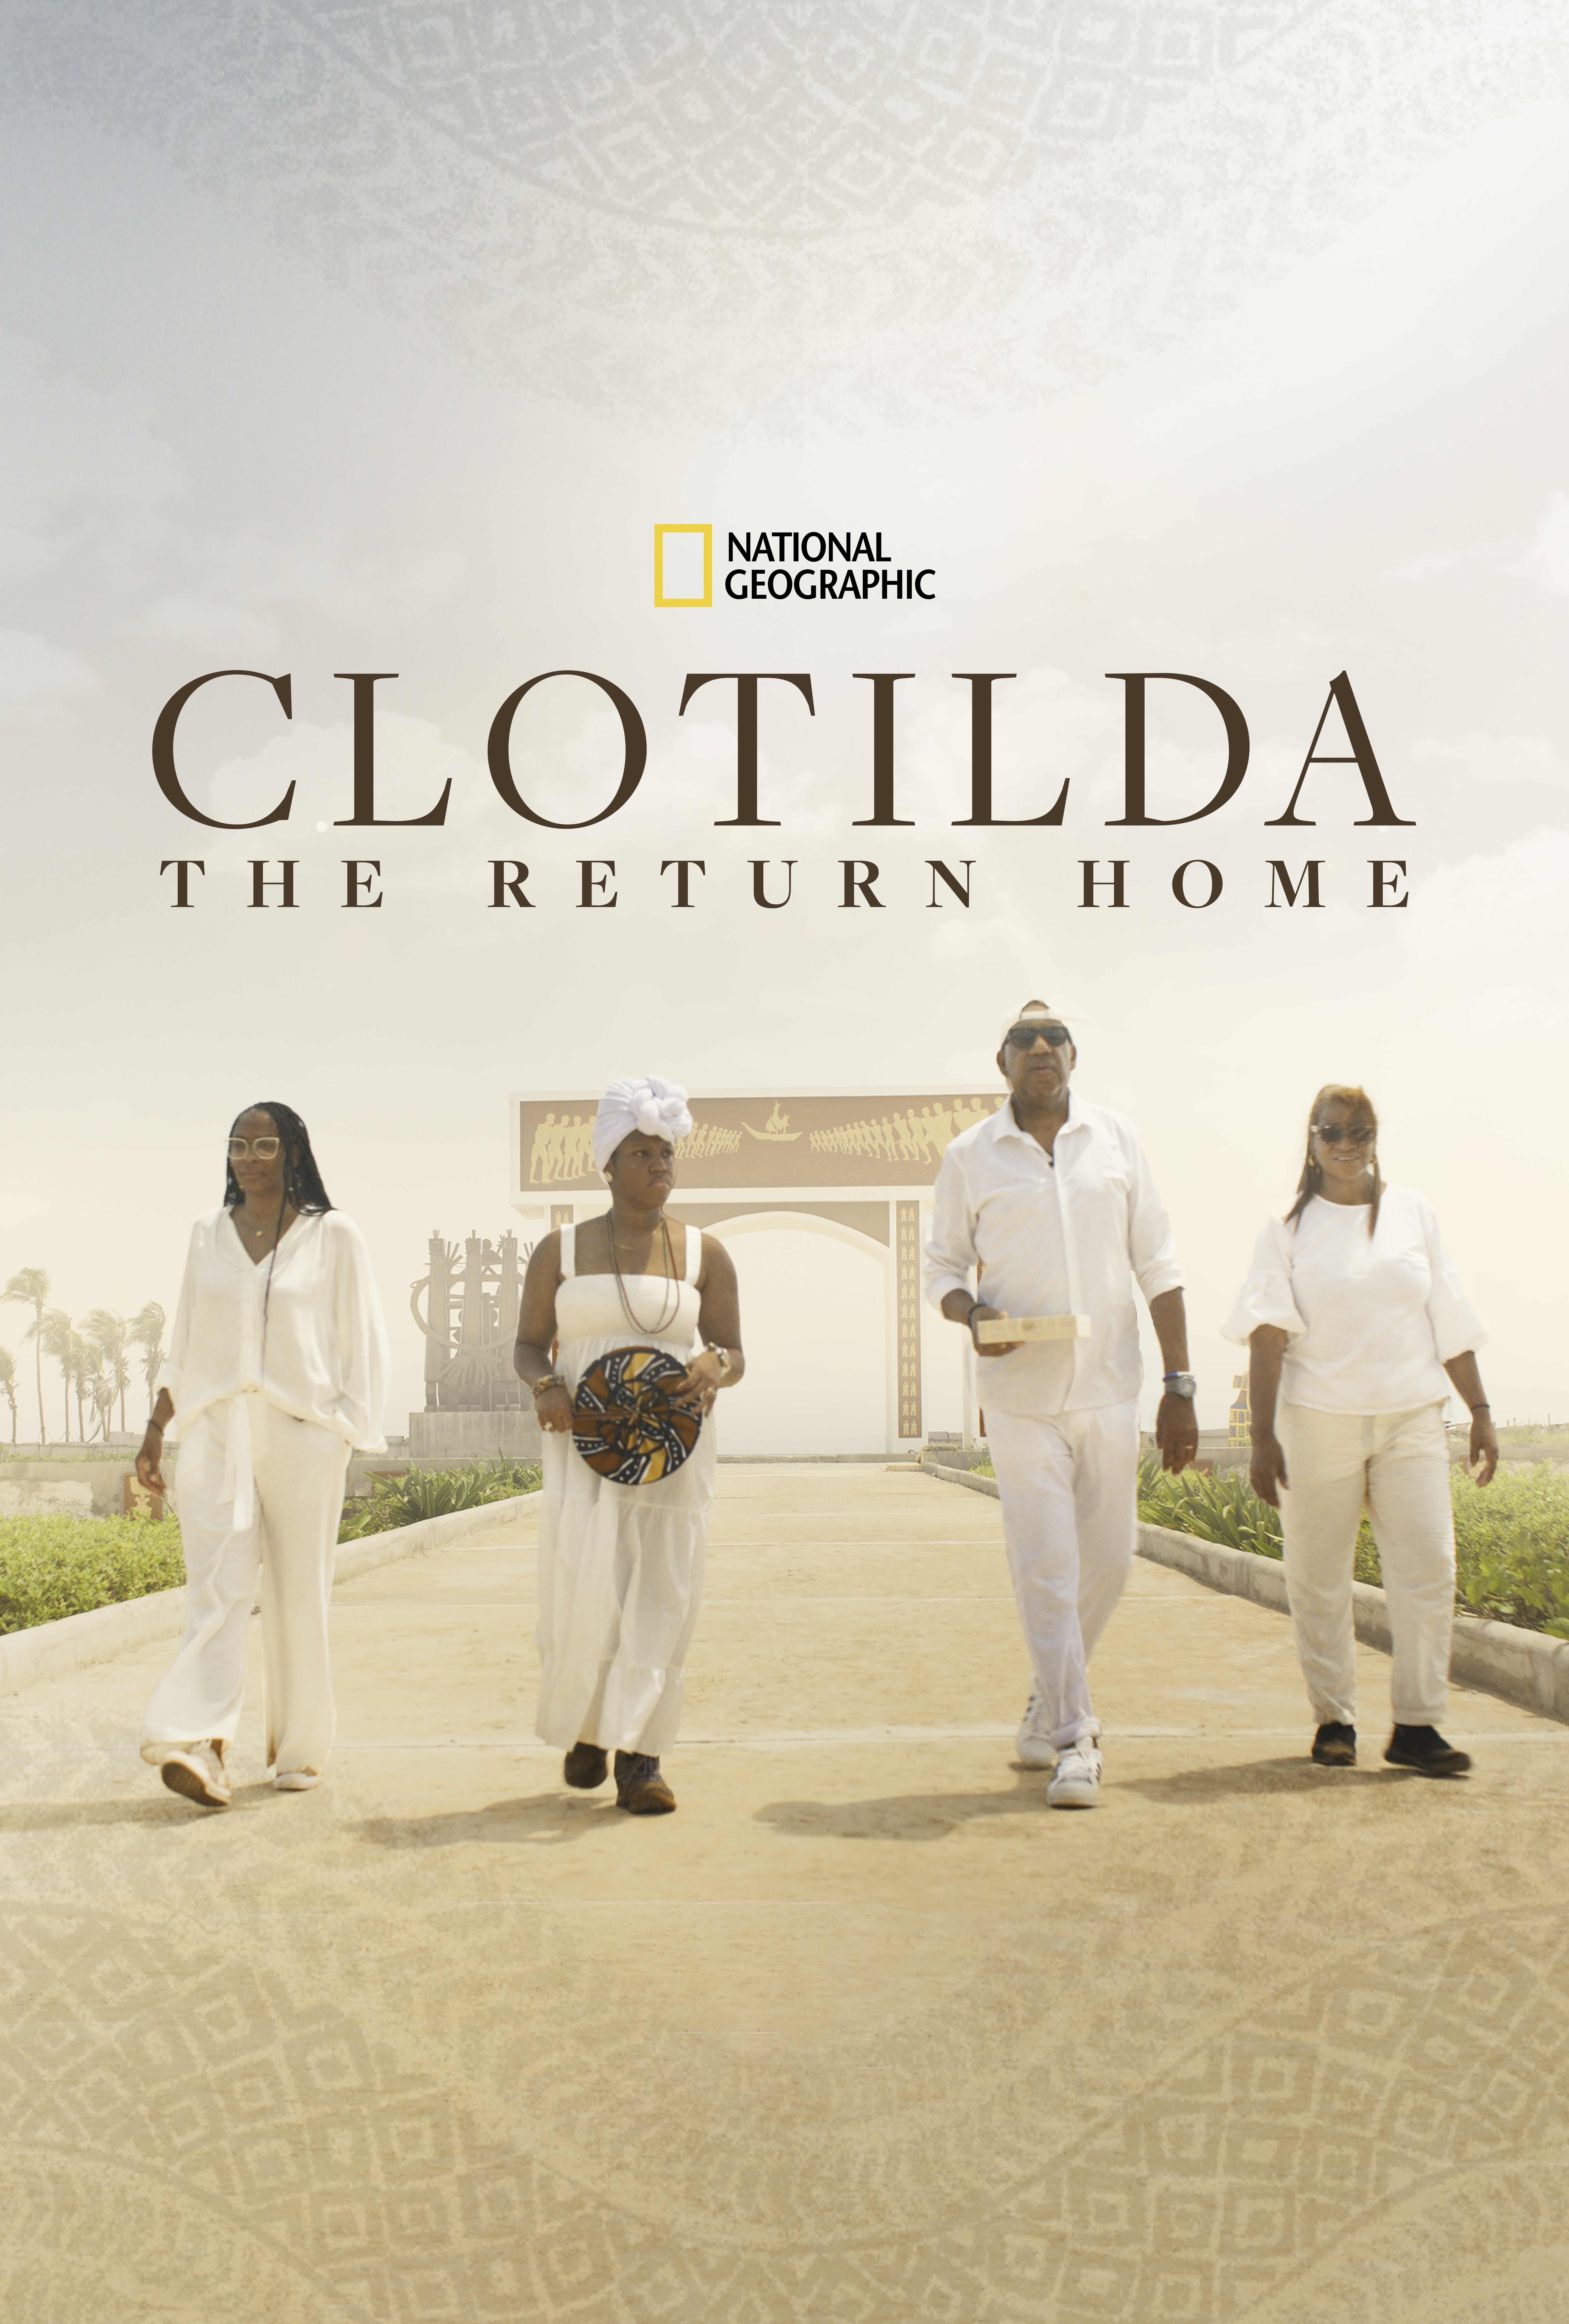 Promtional poster for the new National Geographic documentary "Clotilda: The Return Home"